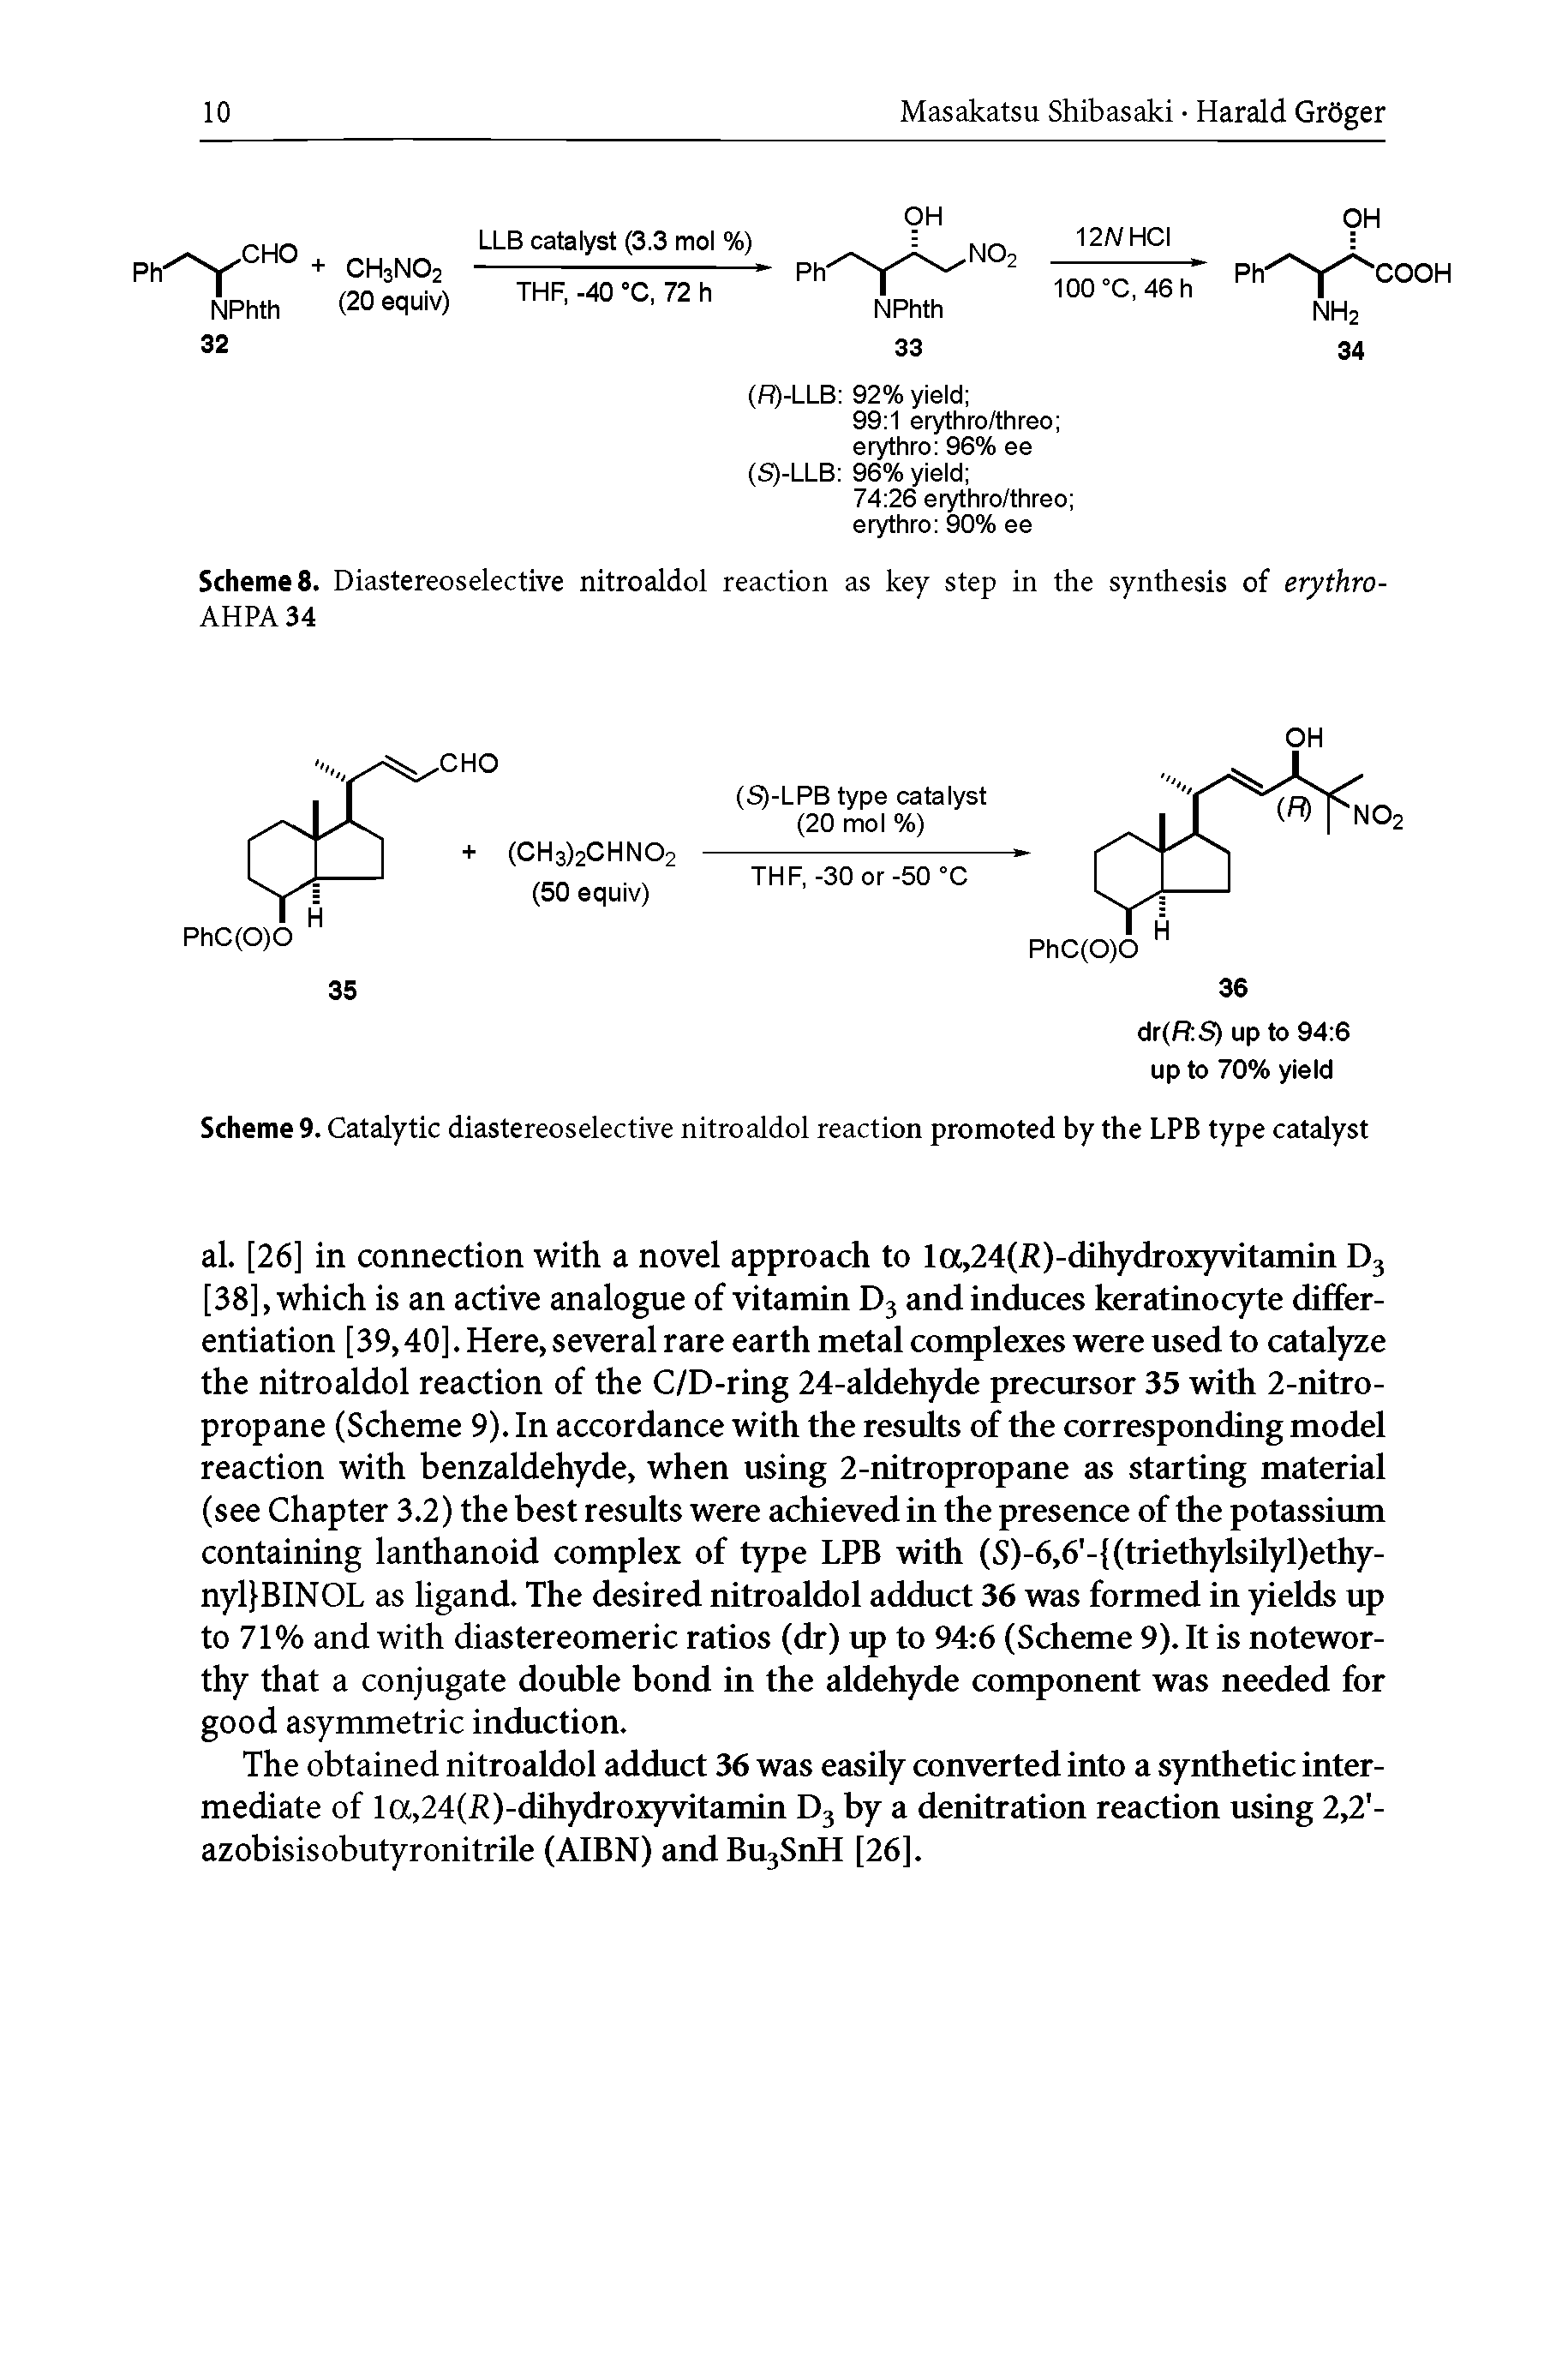 Scheme 9. Catalytic diastereoselective nitroaldol reaction promoted by the LPB type catalyst...